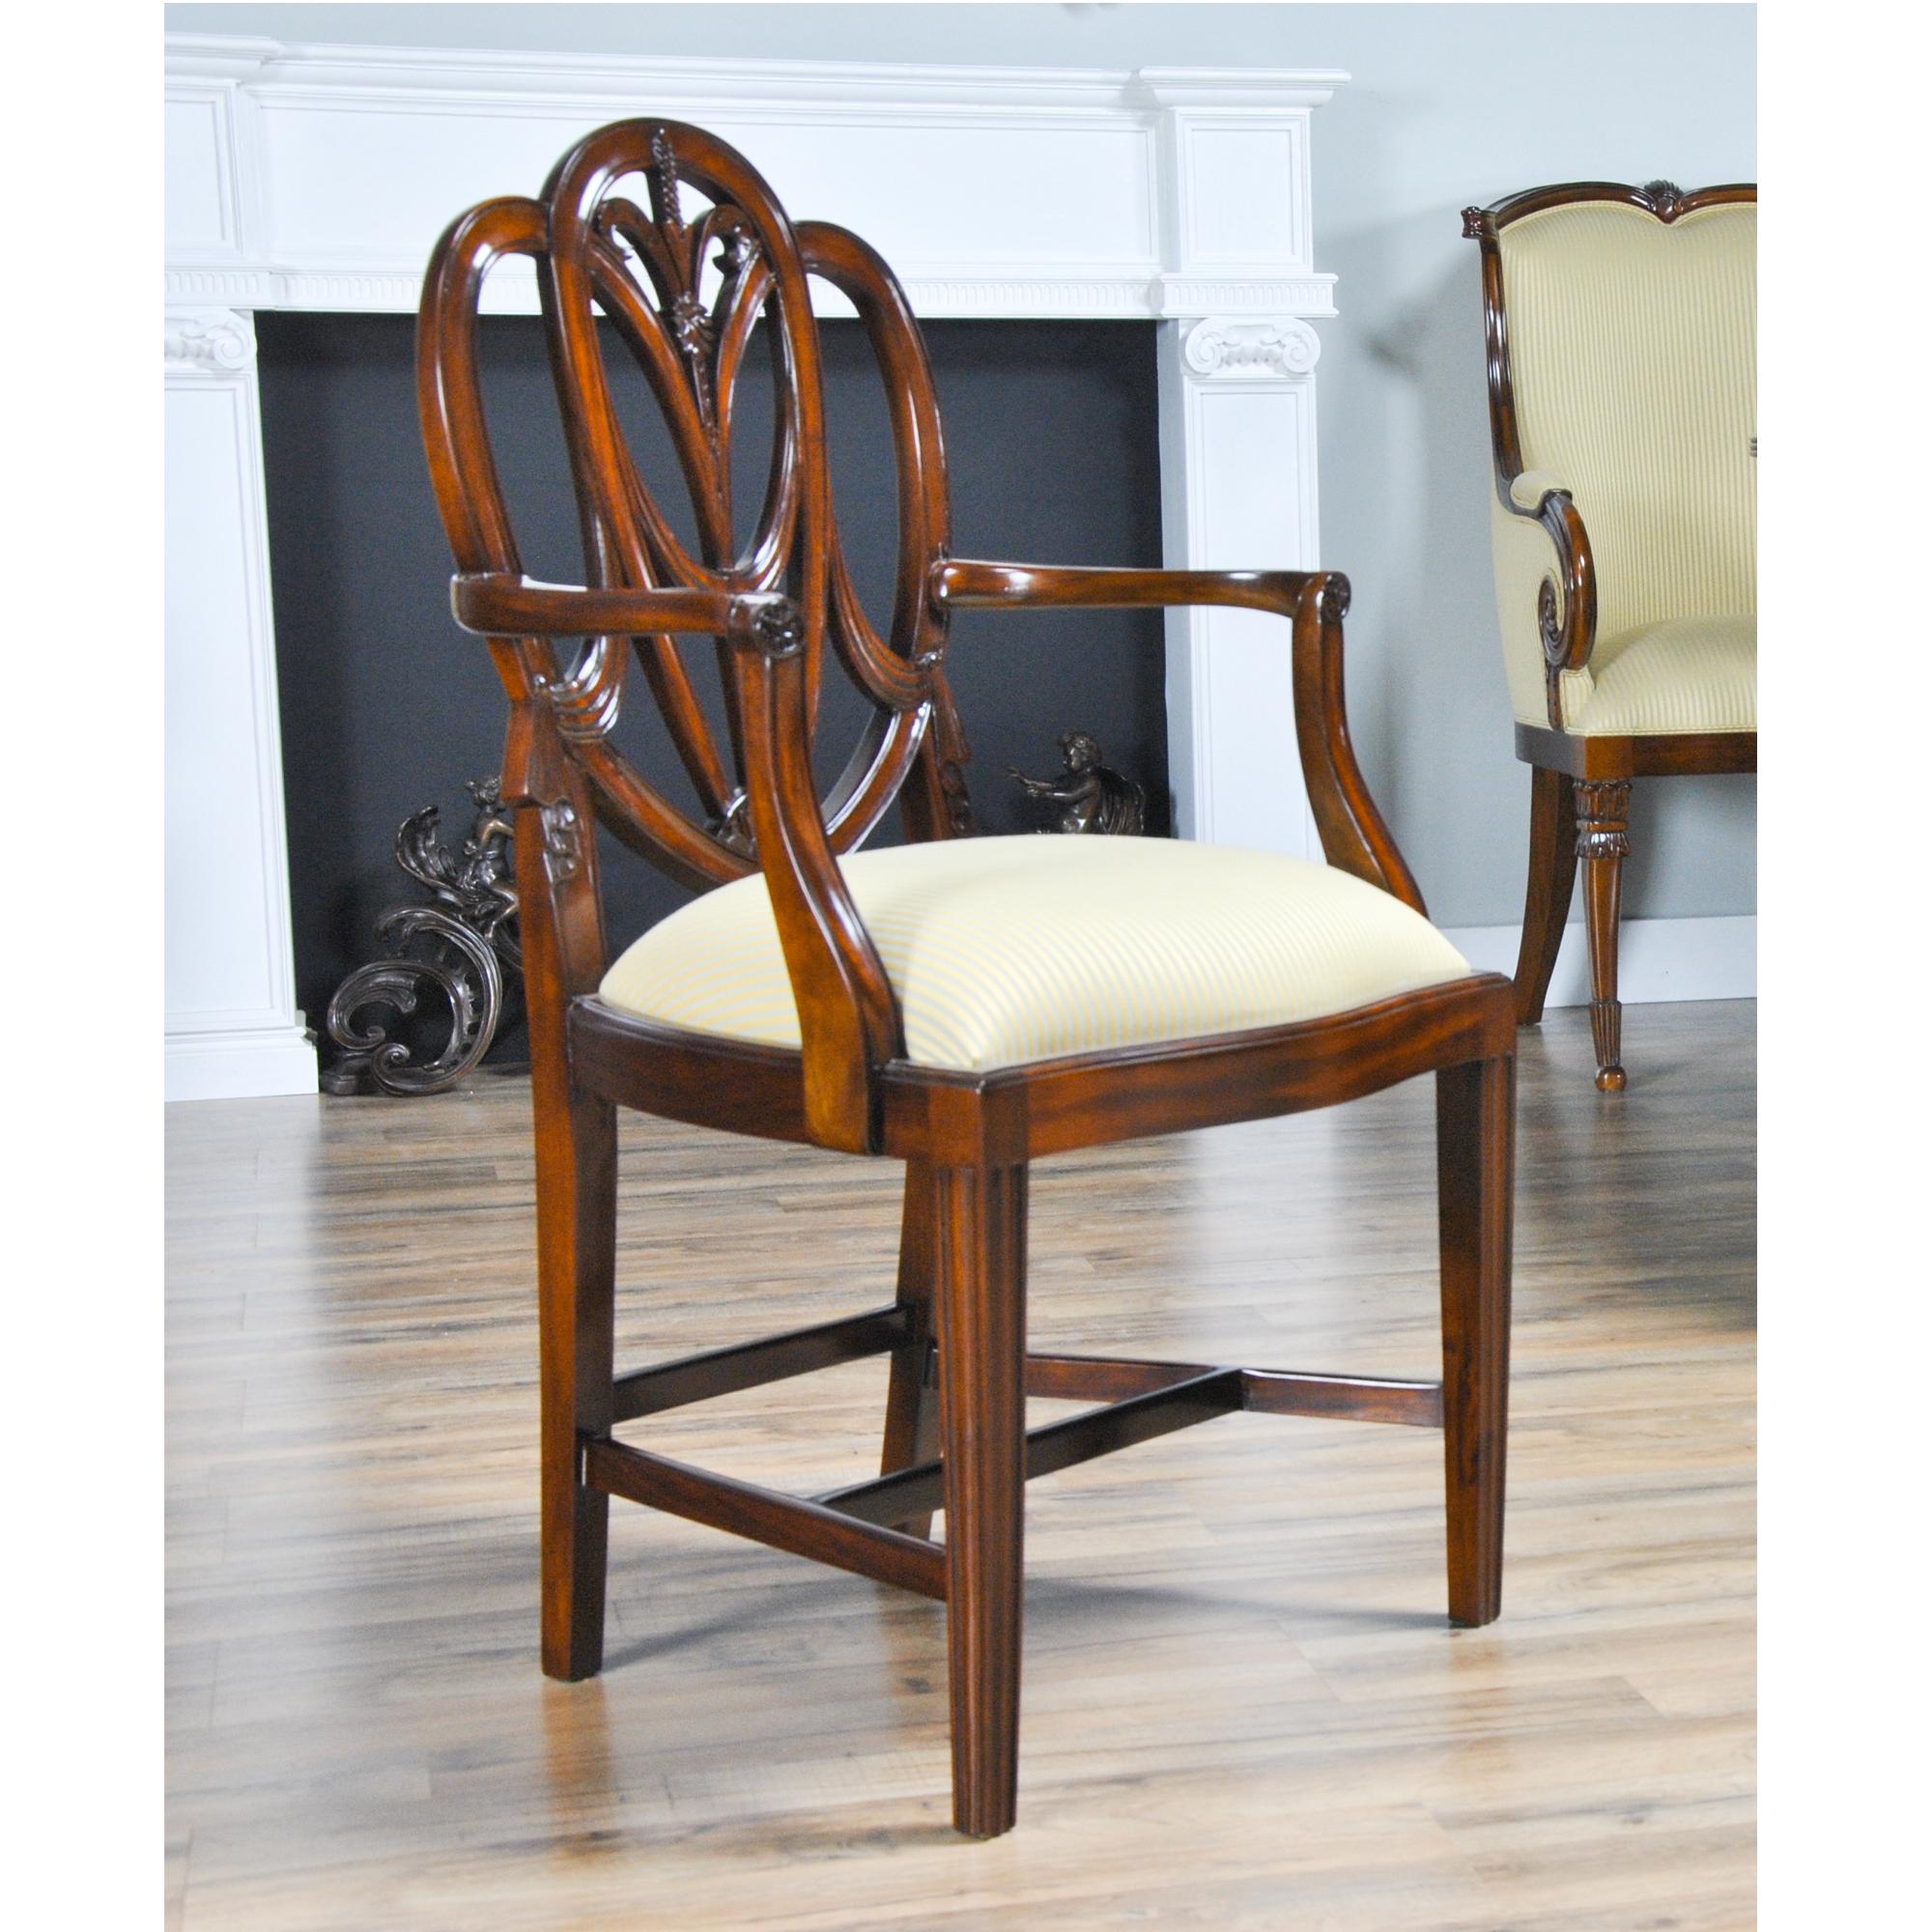 A set of 10 Solid Mahogany Sweet Heart Dining Chairs, the set consisting of 2 arm chair s and 8 side chairs. This style of chair are also known as a Heart Shaped Chairs. They have an elegant and stylish back featuring Drape Carvings as well as